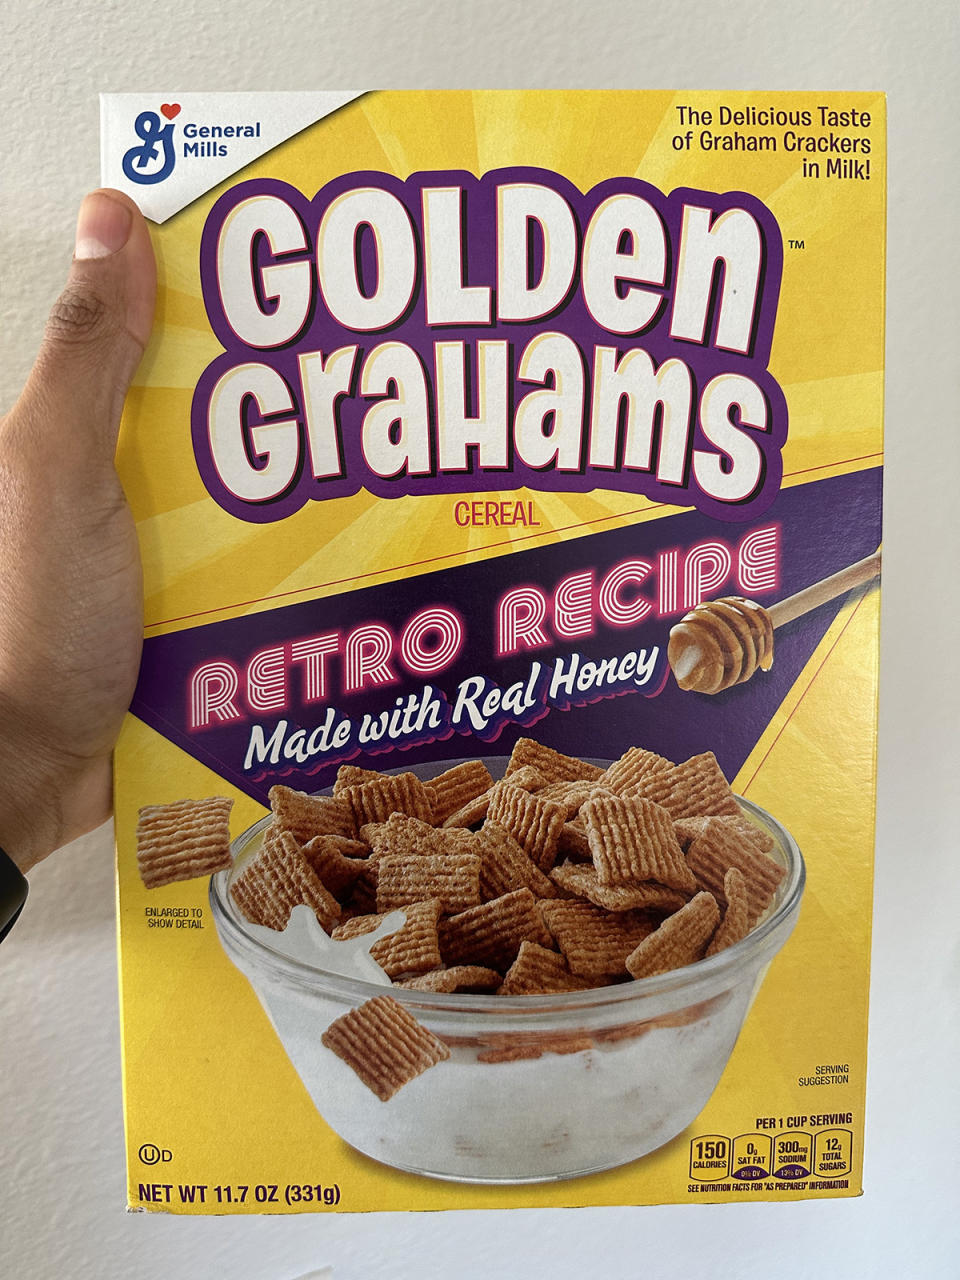 A box of Golden Grahams cereal